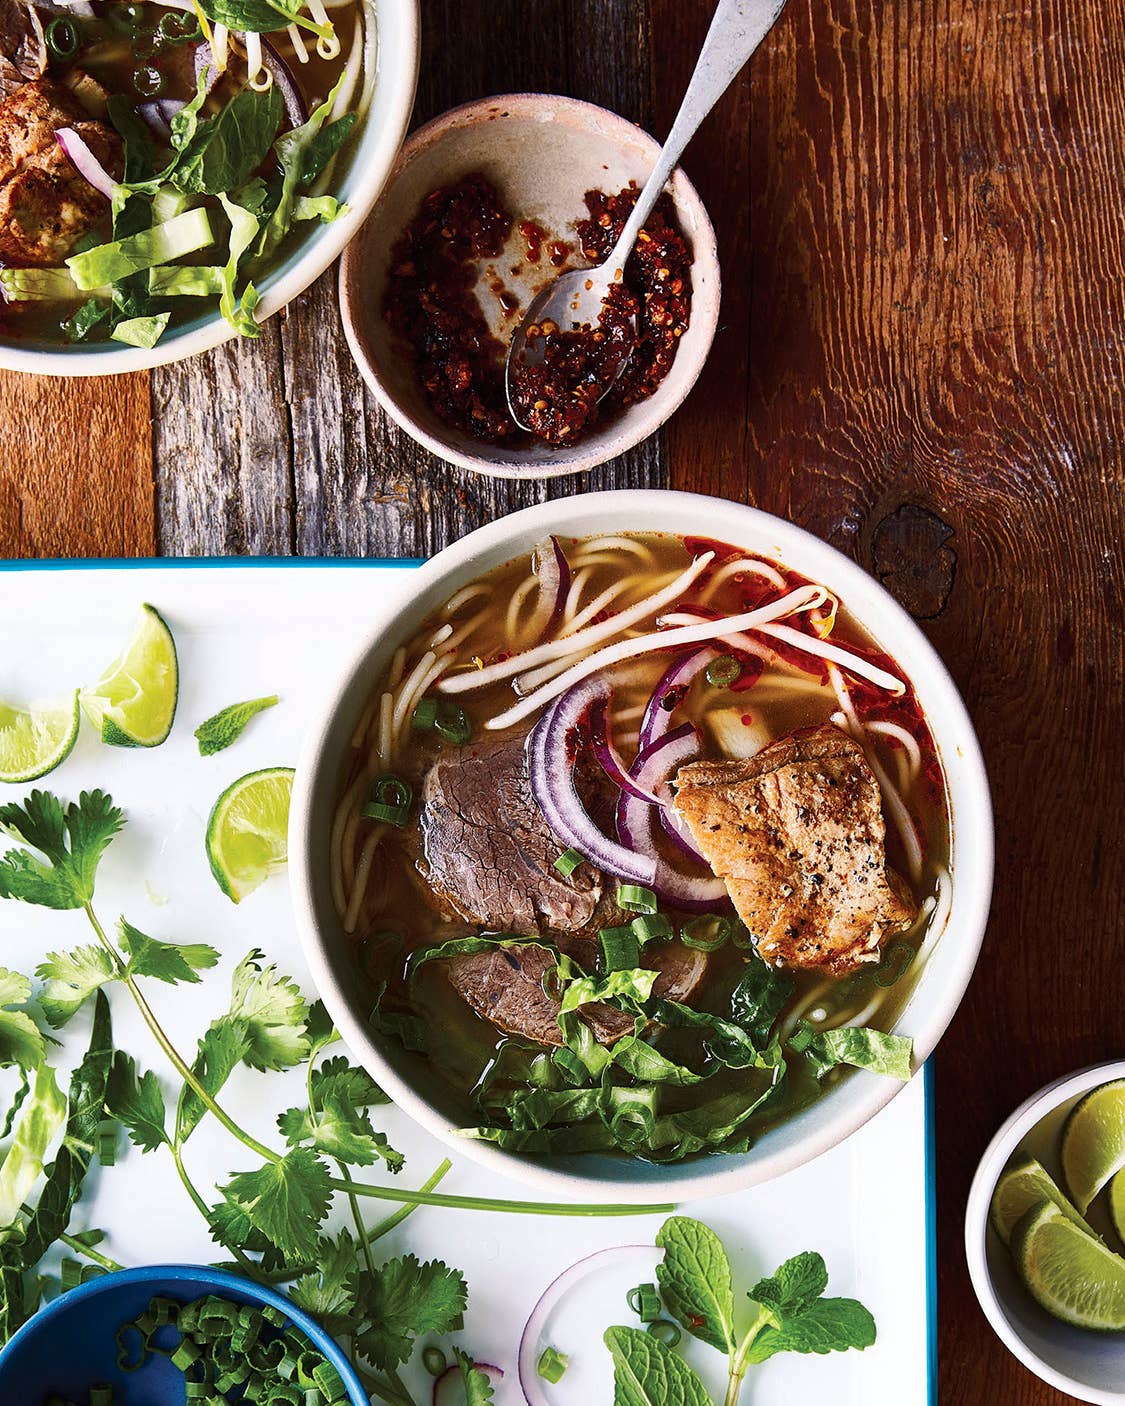 Andrea Nguyen’s Latest Cookbook Is a Seminal Work for Vietnamese Cuisine